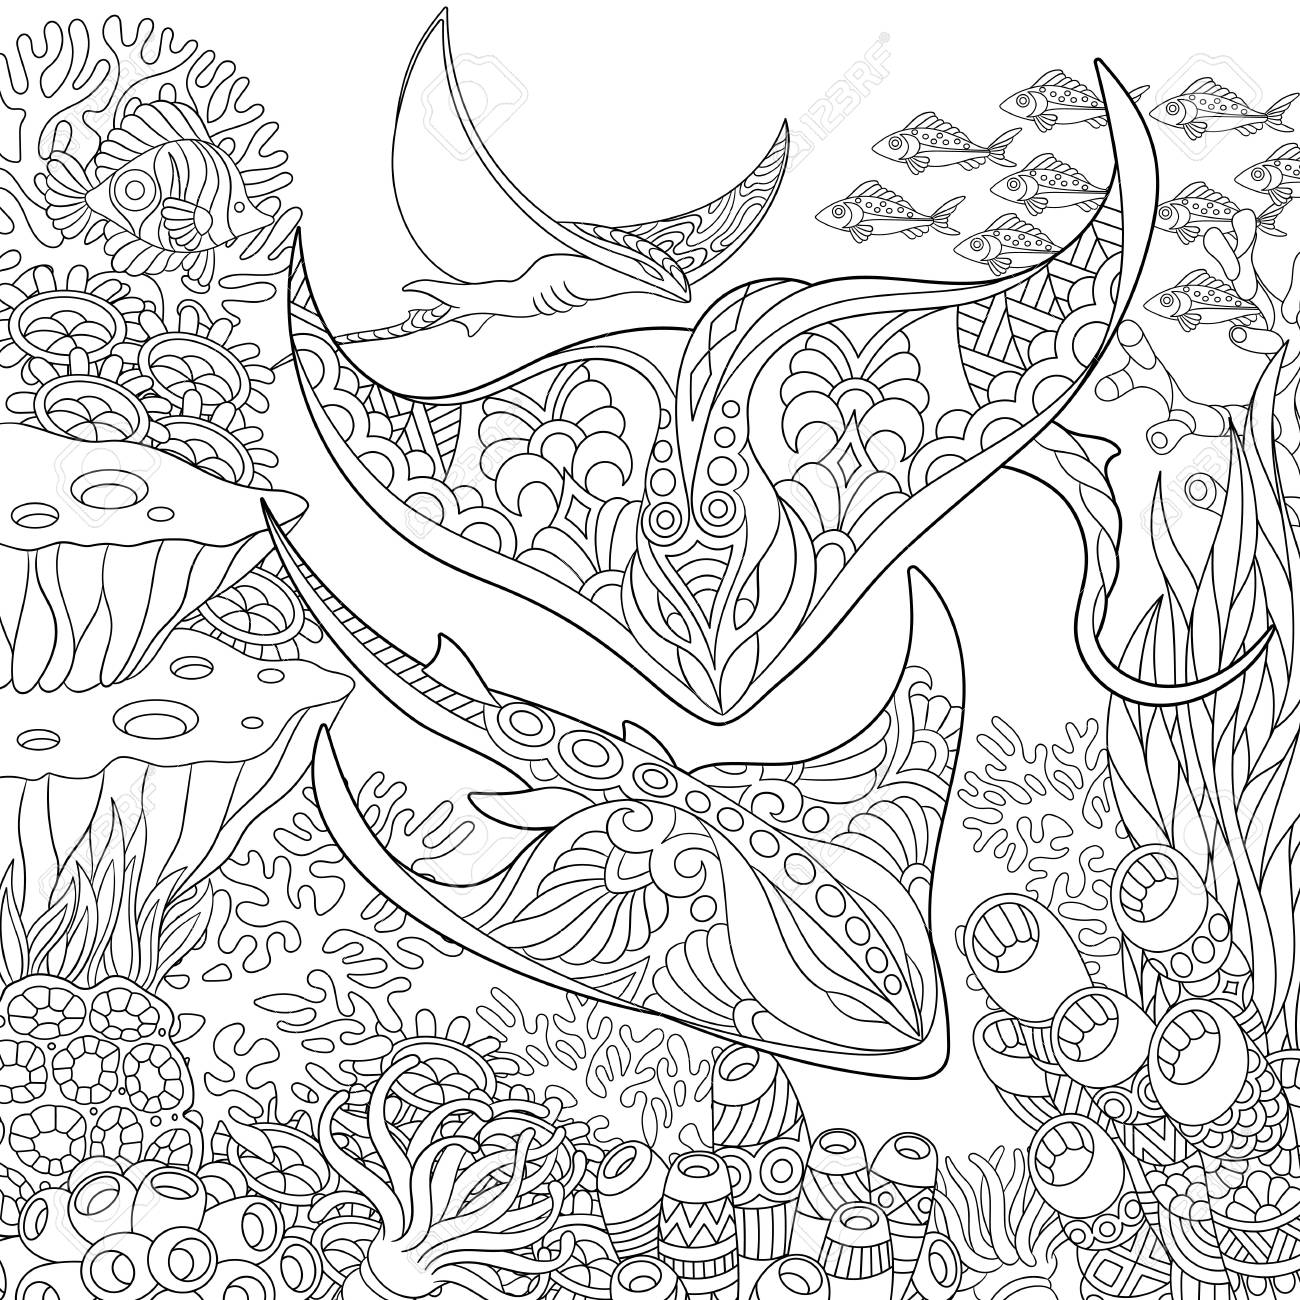 Coloring Page : Coloring Page Free For Adults Landscapen Scene ...